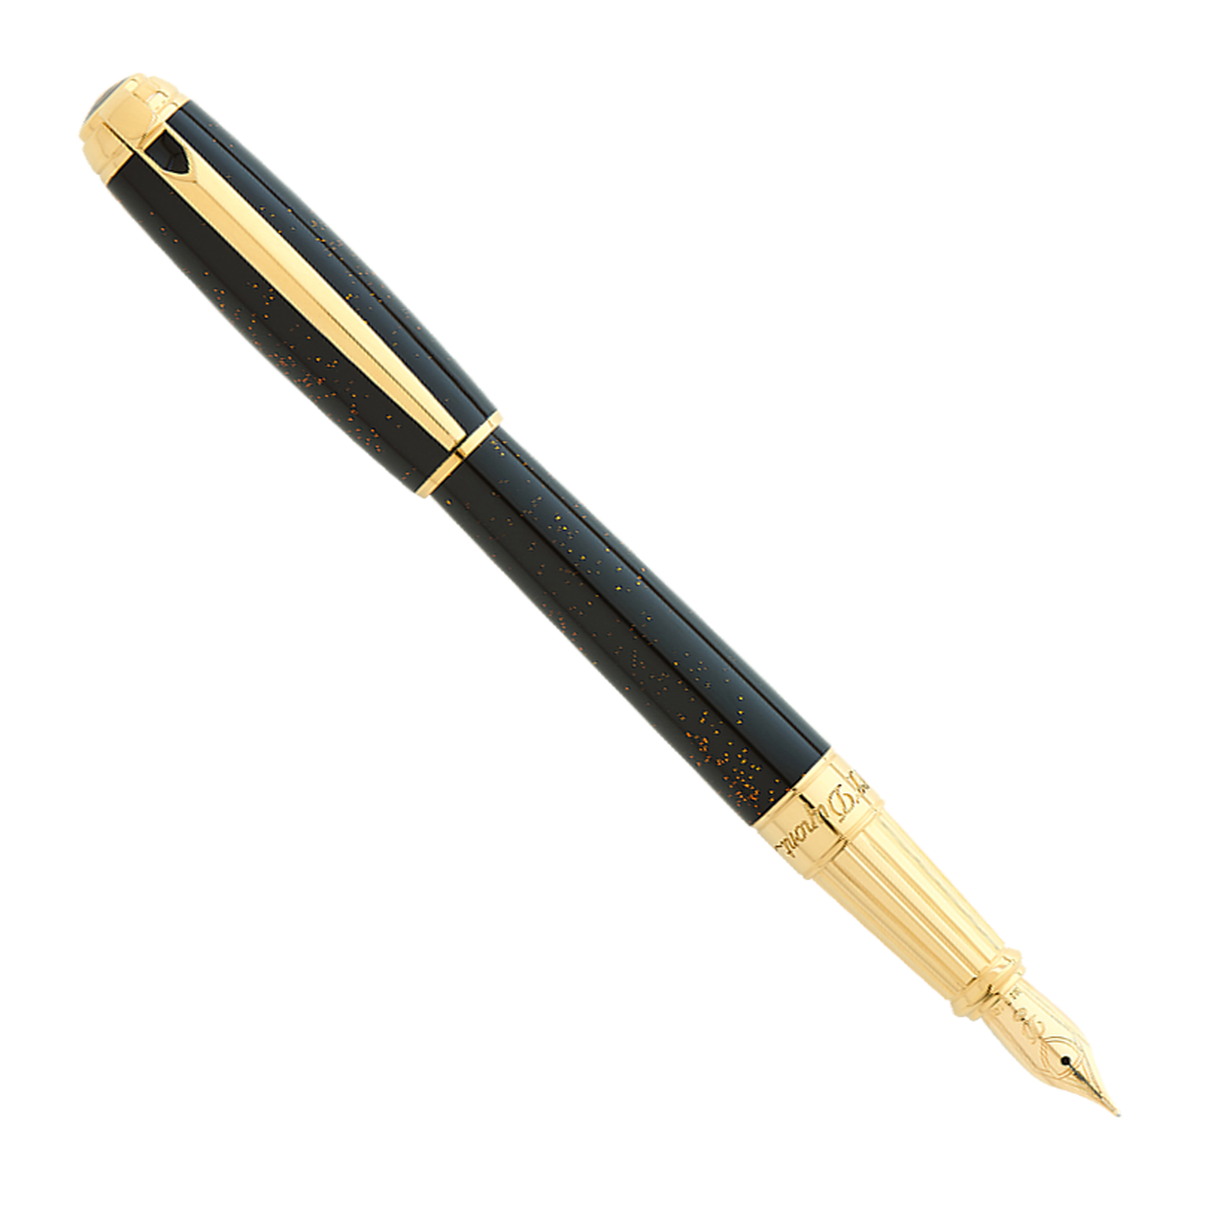 S.T. Dupont Line D Gold Dust Black Lacquer with Gold Dust - Fountain Pen (14kt Nib)